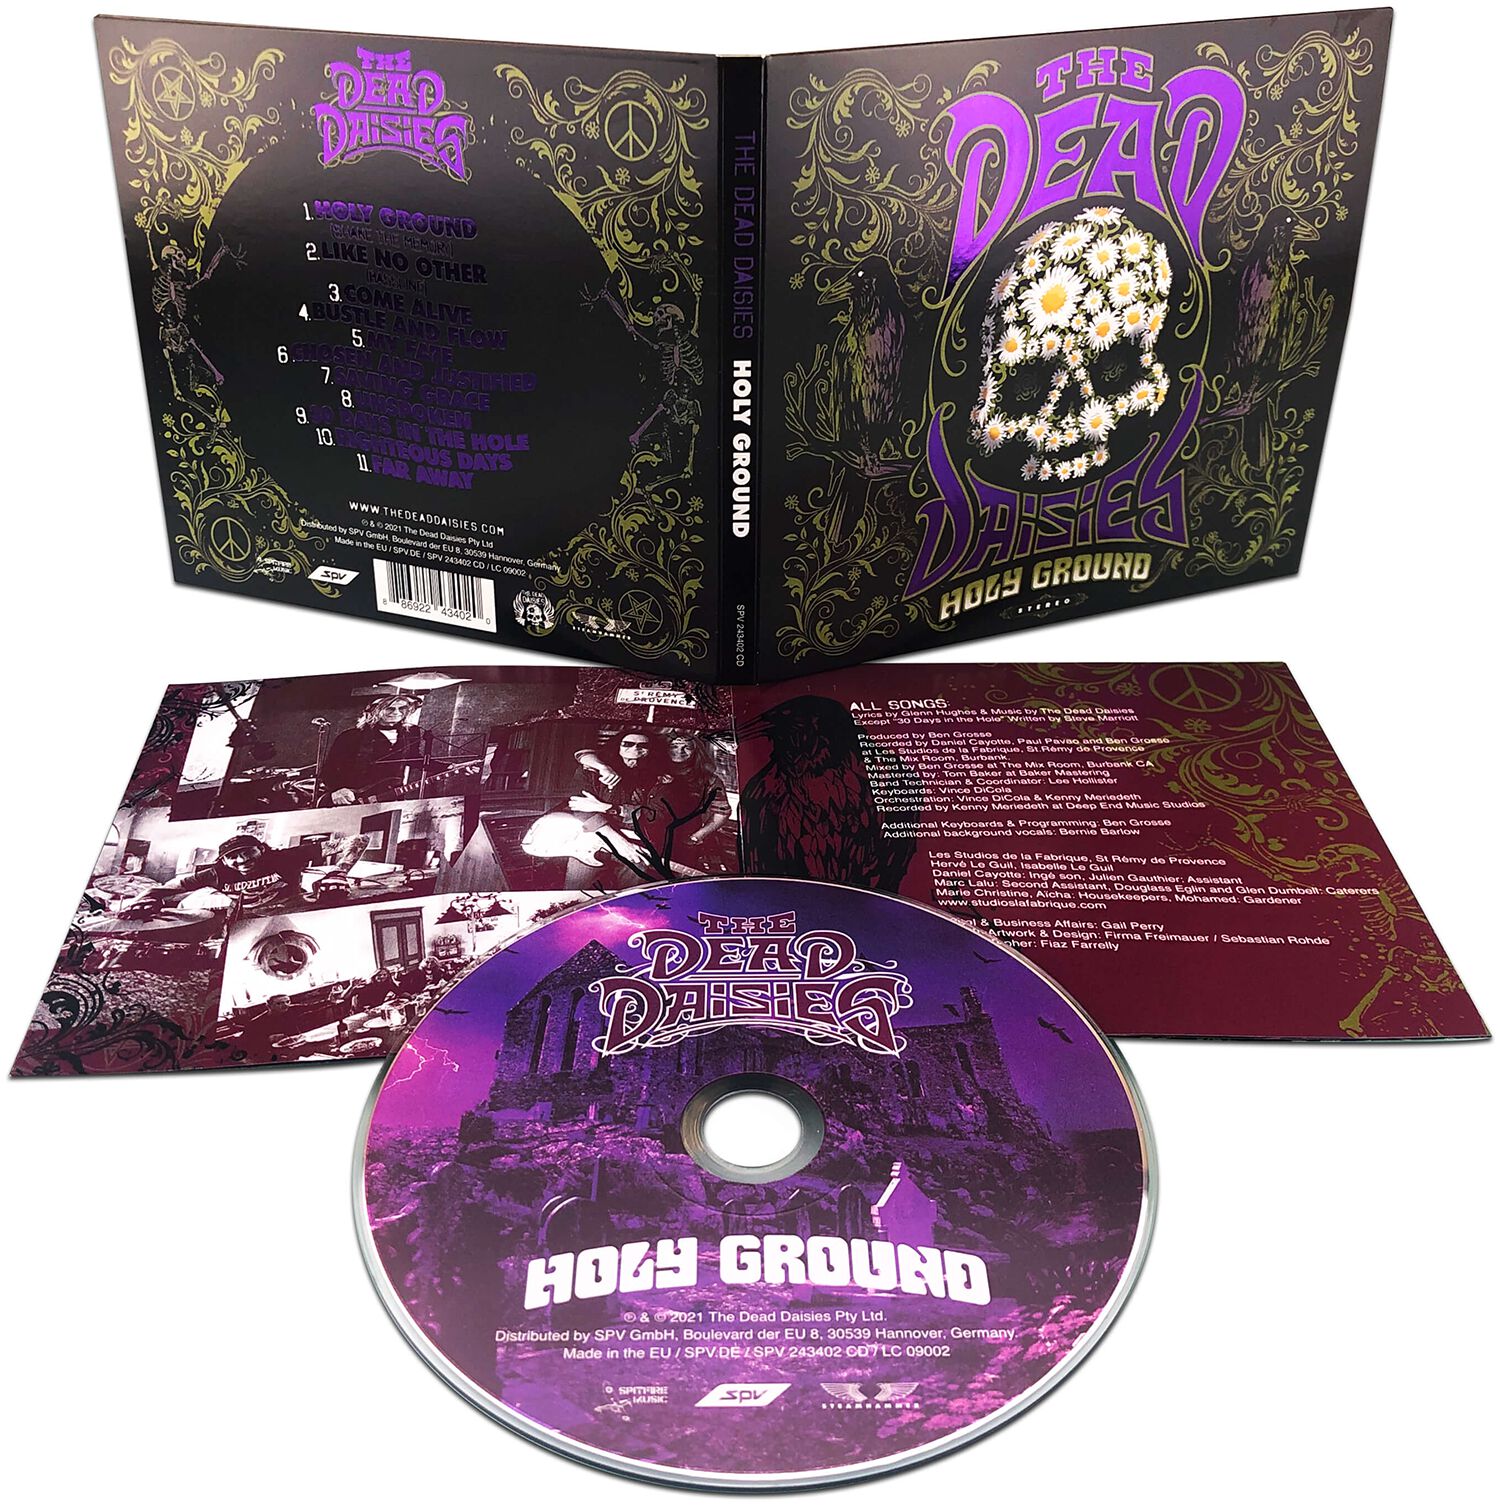 Image of The Dead Daisies Holy ground CD Standard